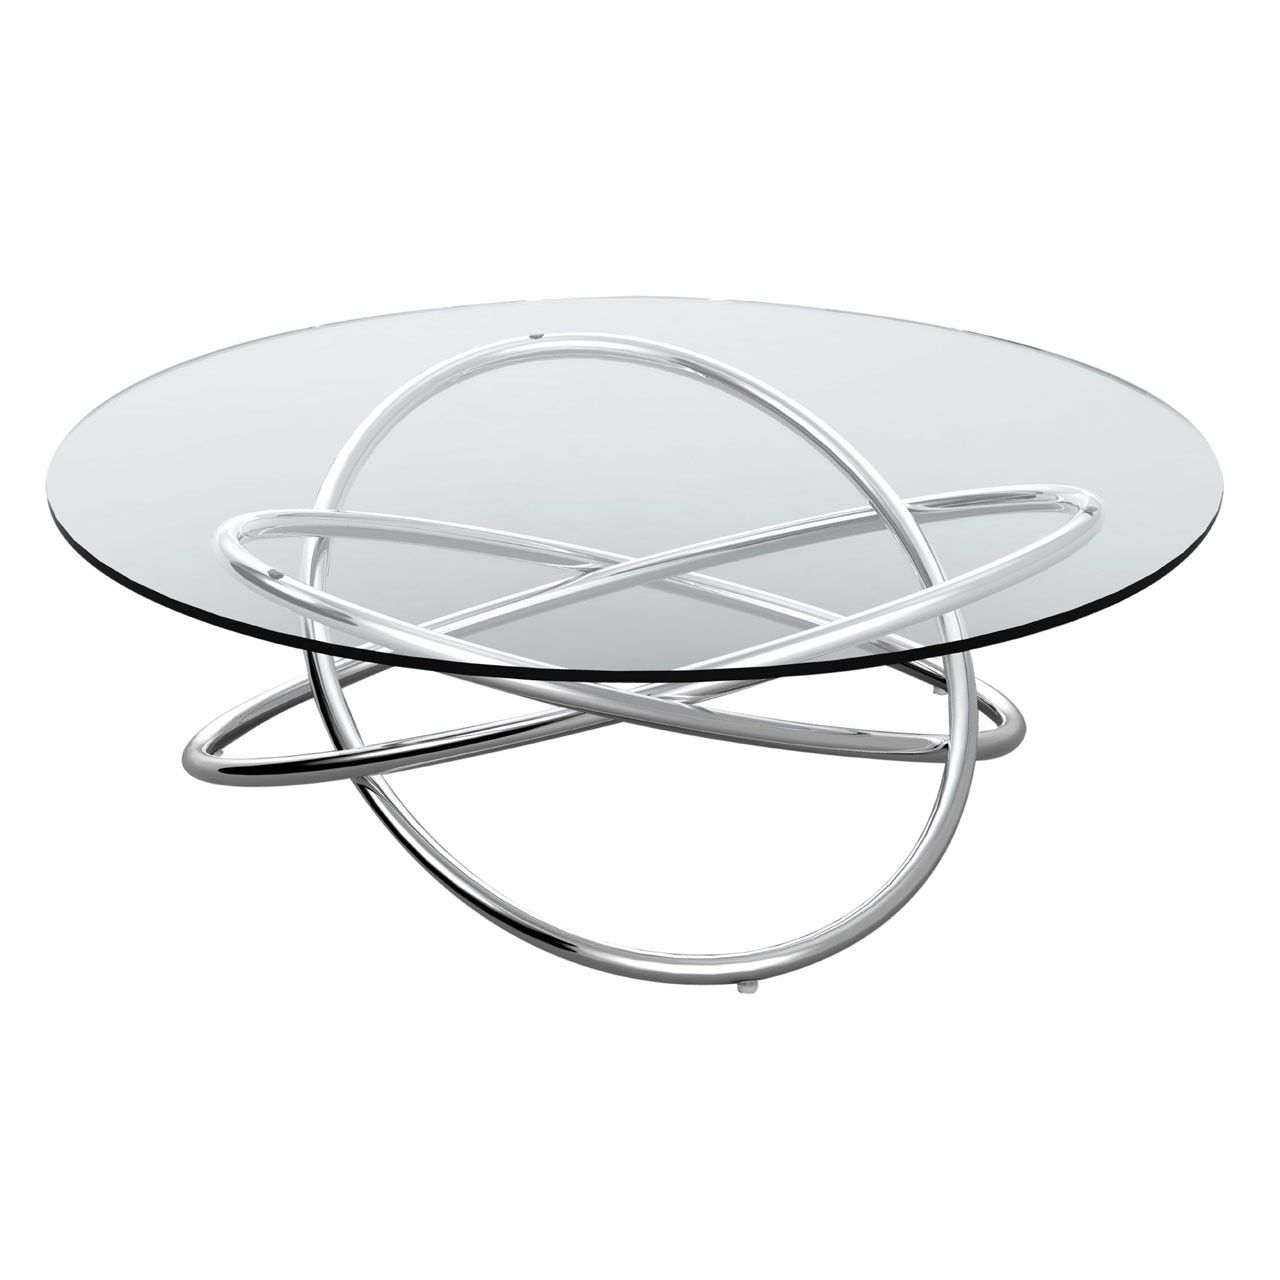 2019 Clear Glass Top Cocktail Tables With Regard To Orb Stainless Steel And Clear Tempered Glass Coffee Table (Gallery 16 of 20)